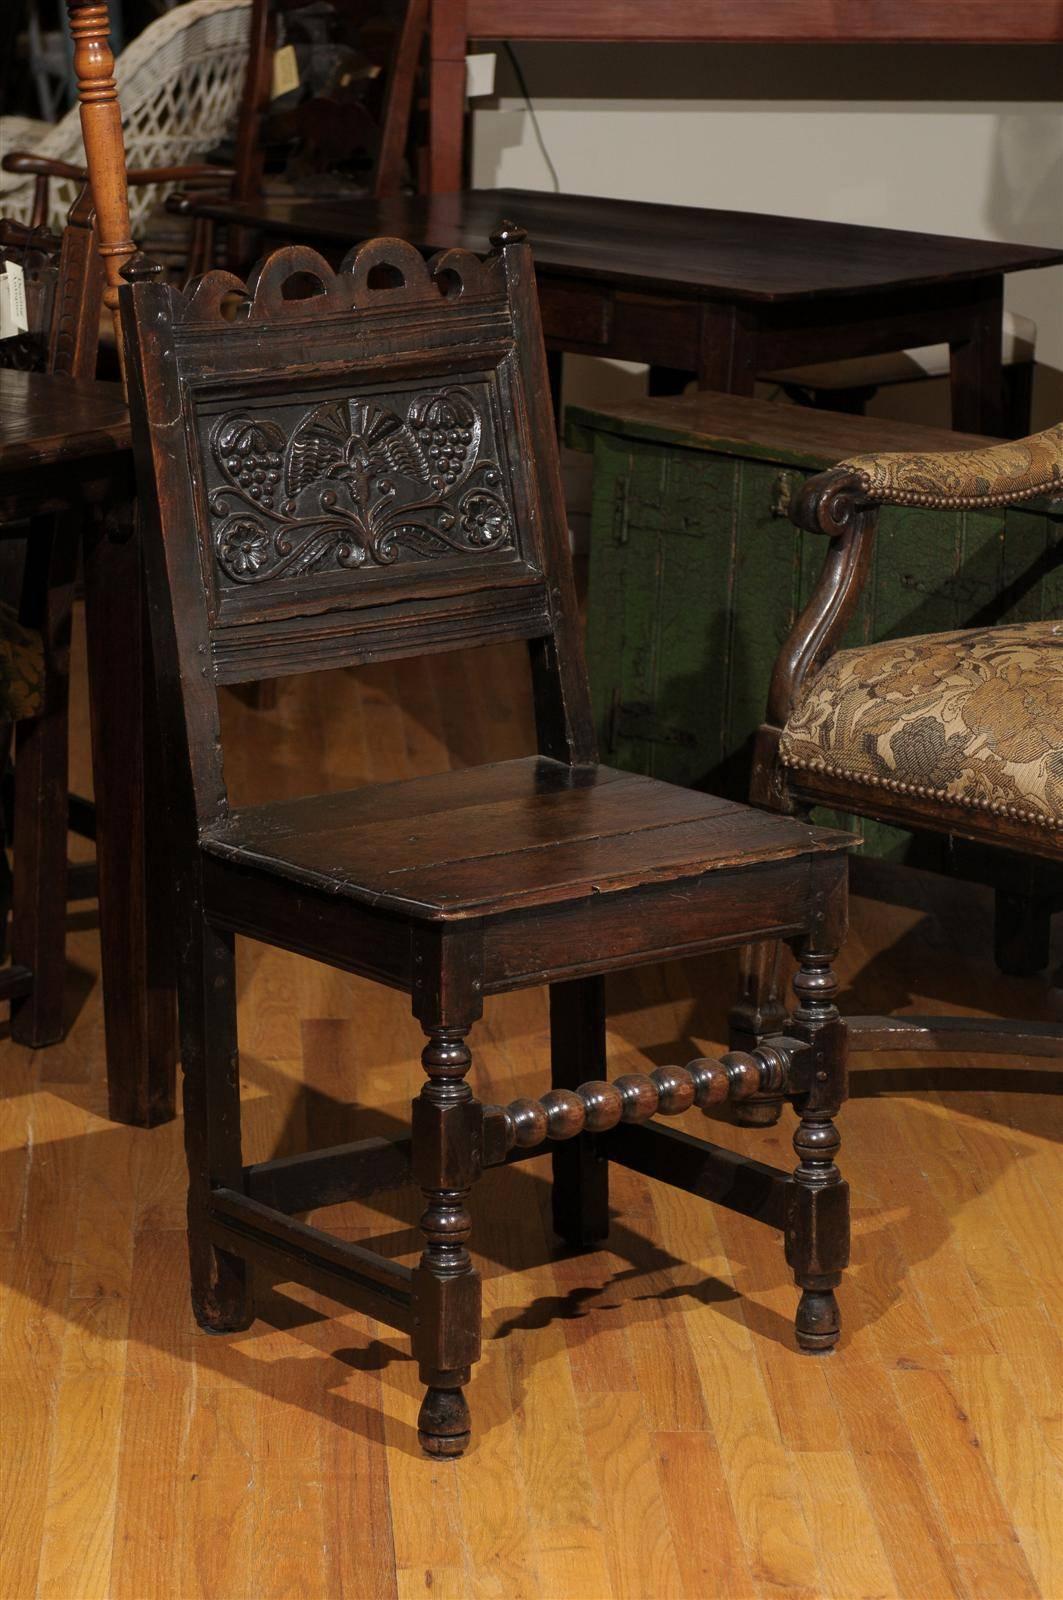 This is a beautifully carved 17th century oak chair. The back of the chair has a lovely carving of grapes and vines. This chair is Jacobean, which dates back to 1603-1625 when James I was king and up to 1688 during King James II reign. This type of